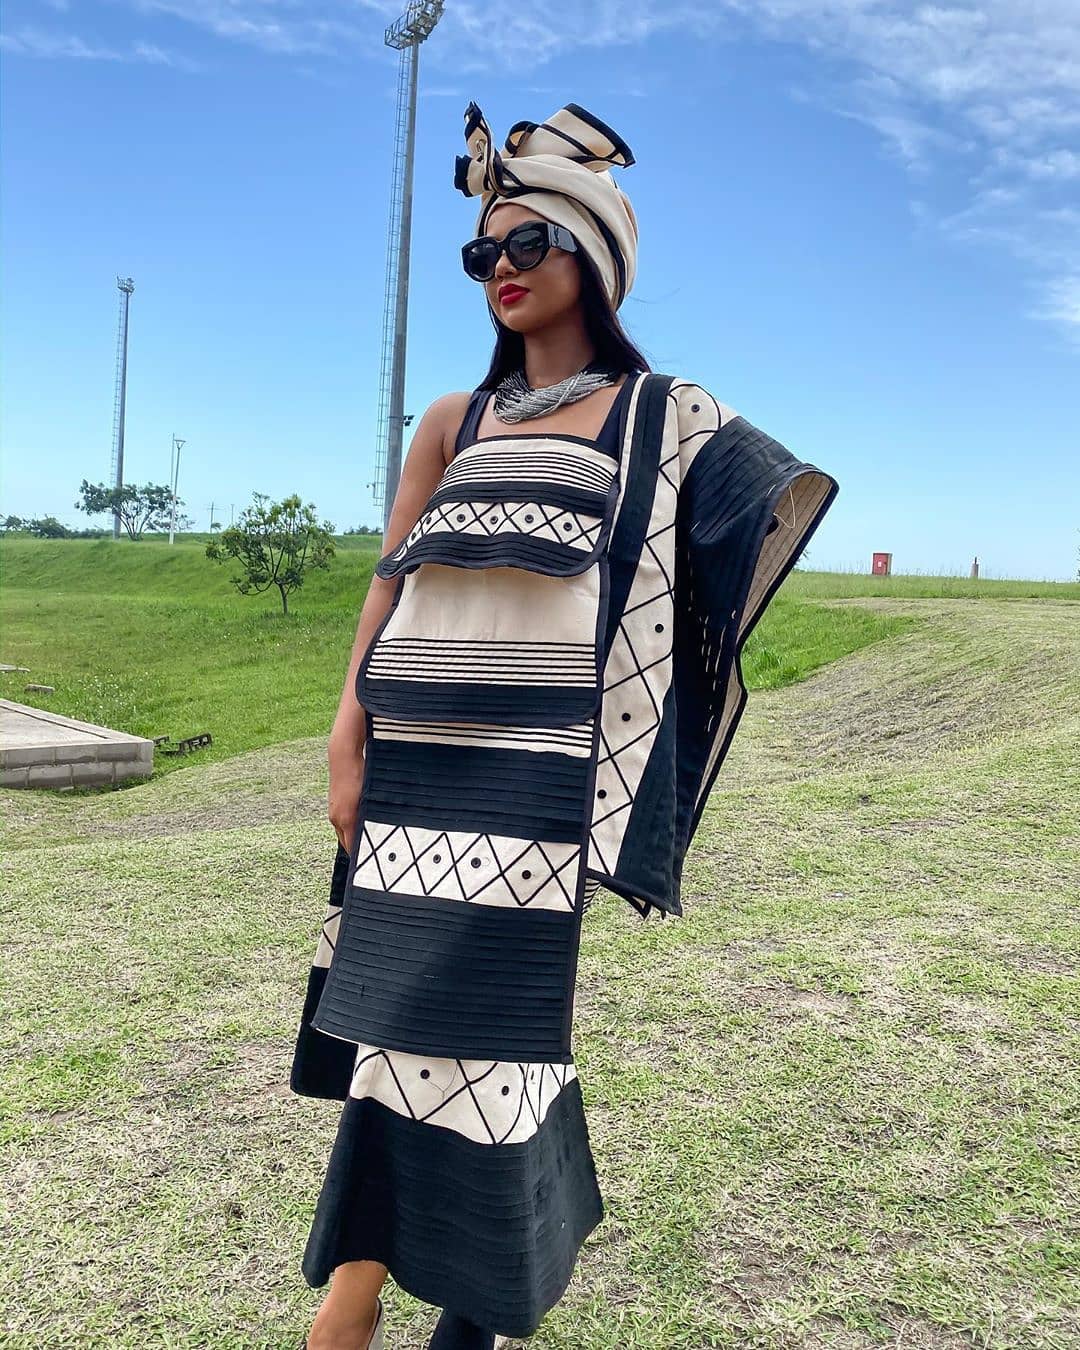 Xhosa Woman In Her Xhosa Traditional Attire South African | My XXX Hot Girl